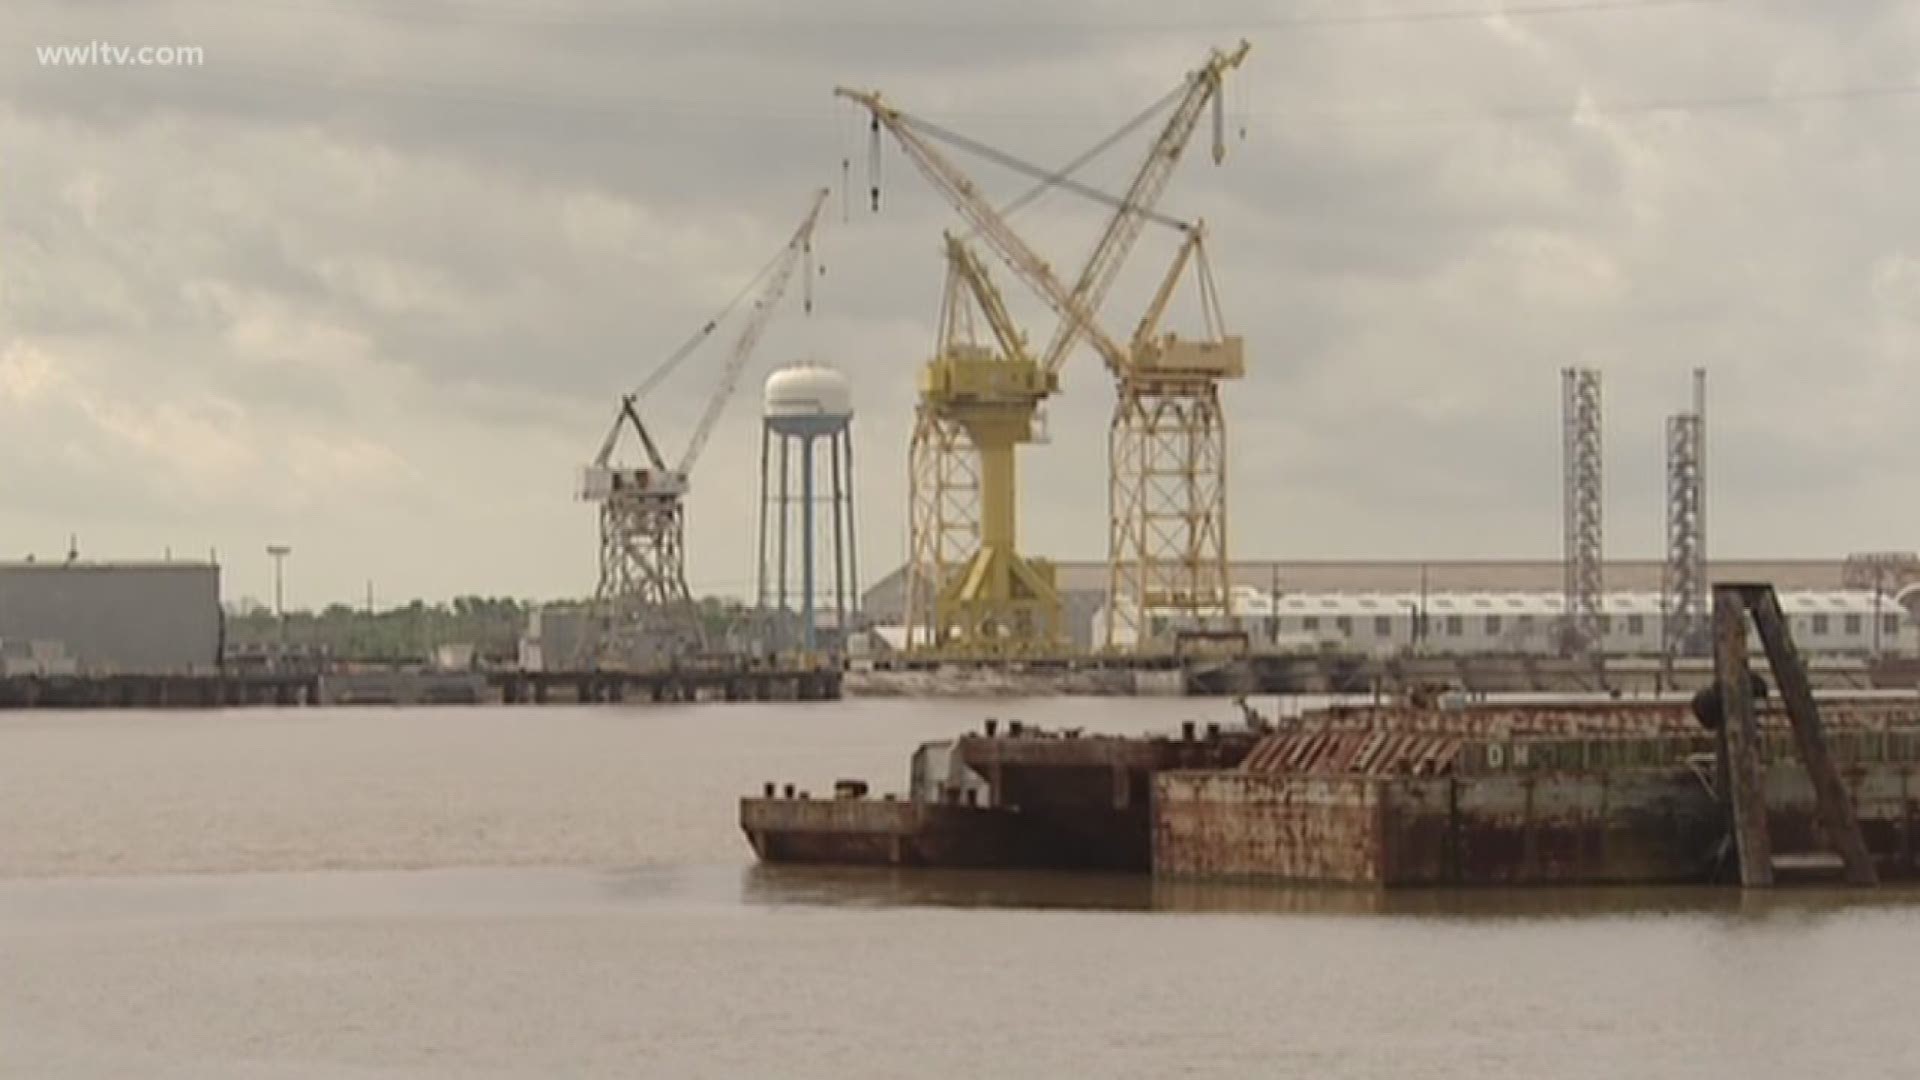 Governor John Bel Edwards and representatives of two major companies talked about putting the shuttered Avondale shipyard back into commerce and creating a couple of thousand jobs. 